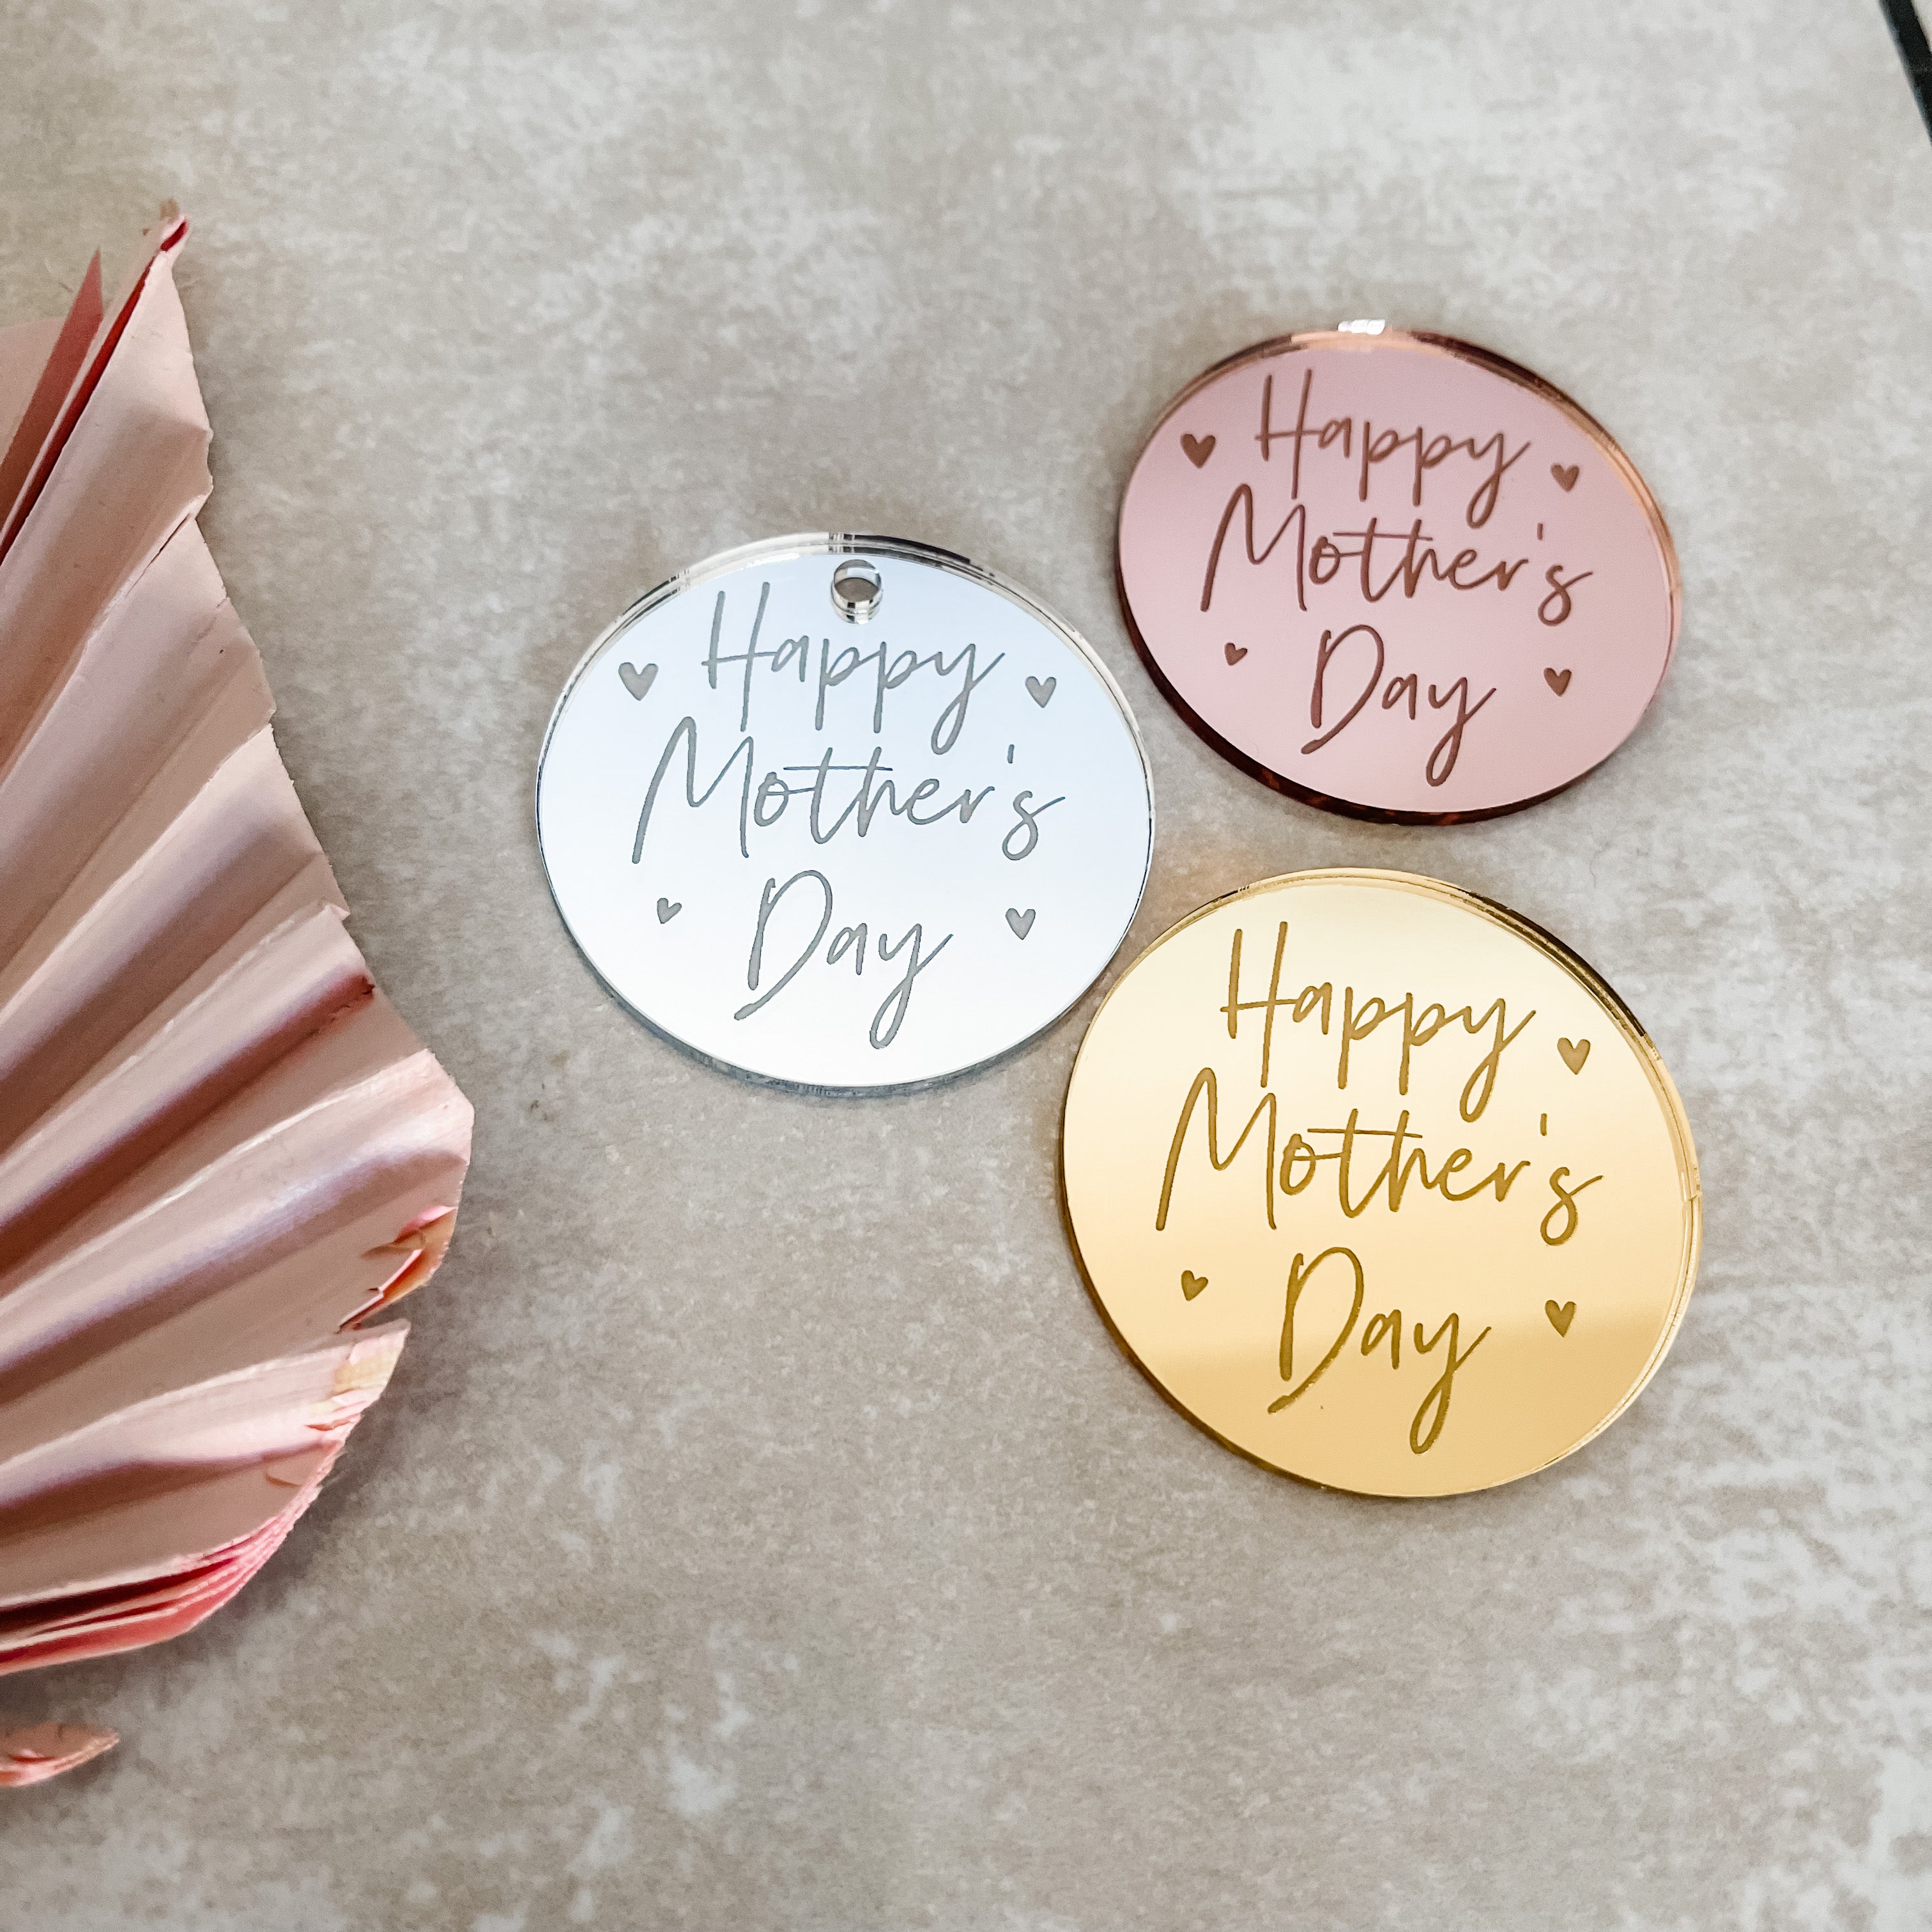 Happy Mother's Day Cupcake Toppers